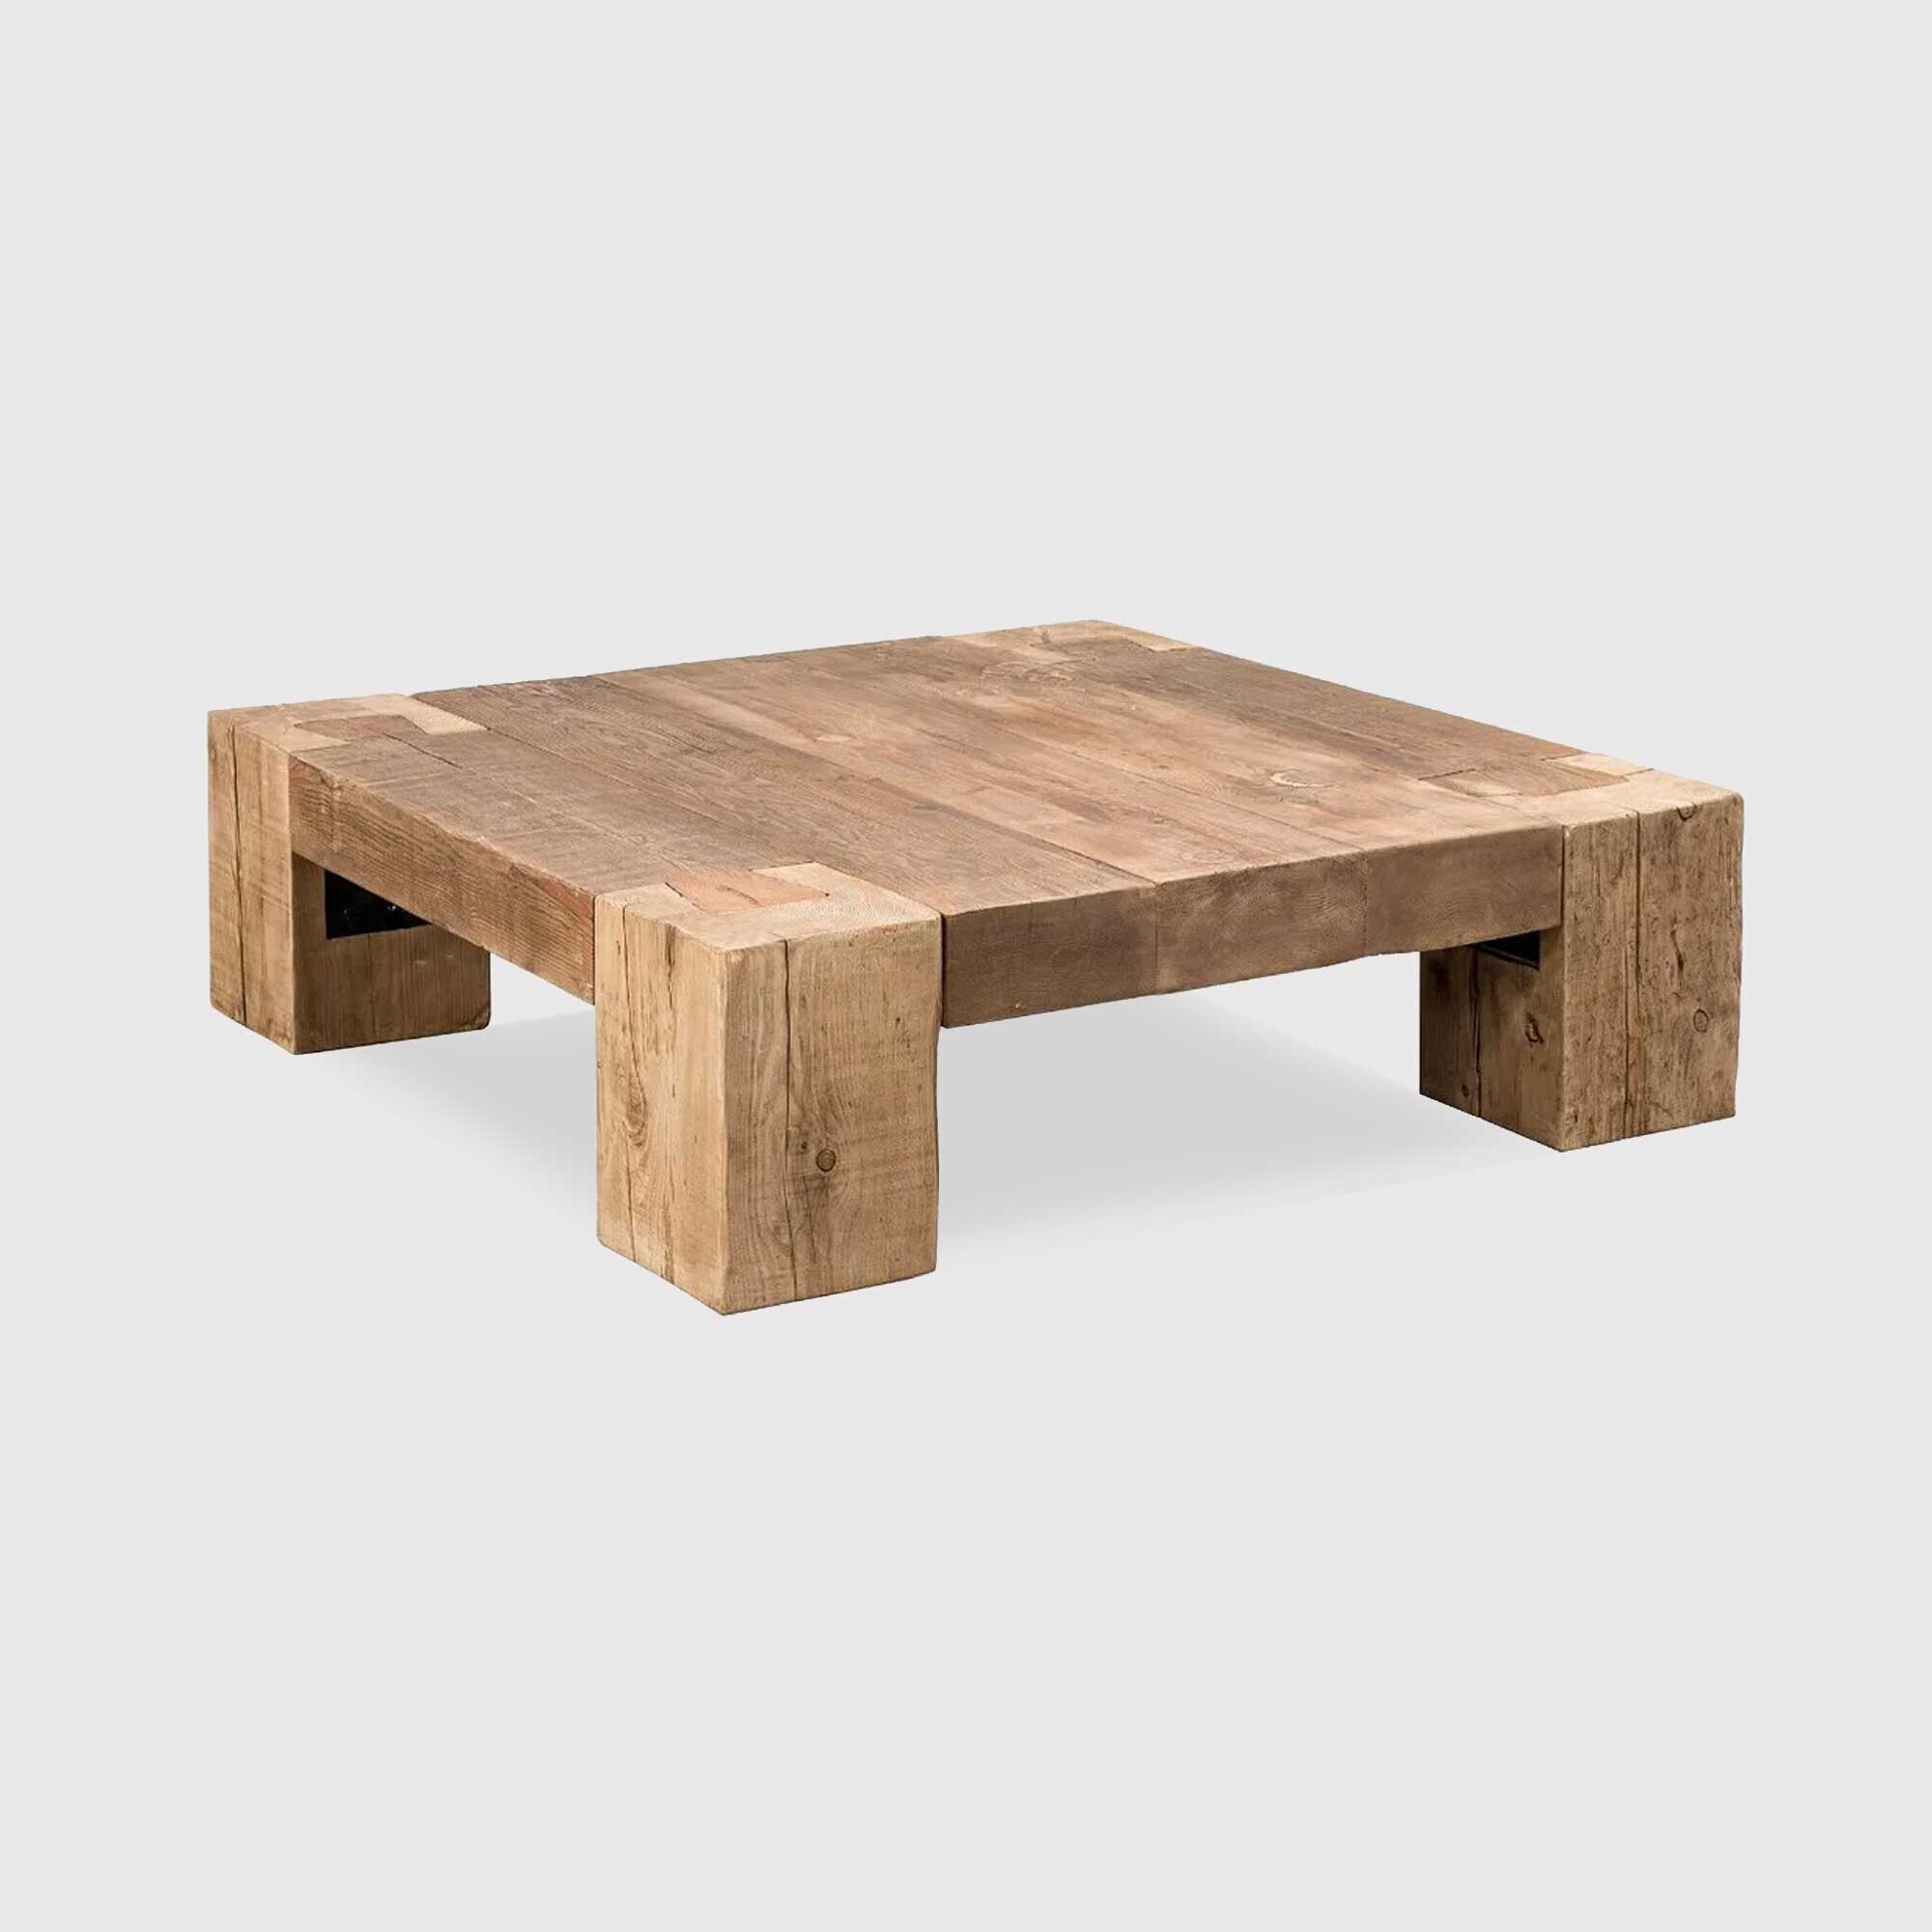 Timothy Oulton English Beam Coffee Table 140x140cm, Neutral Wood - Barker & Stonehouse - image 1